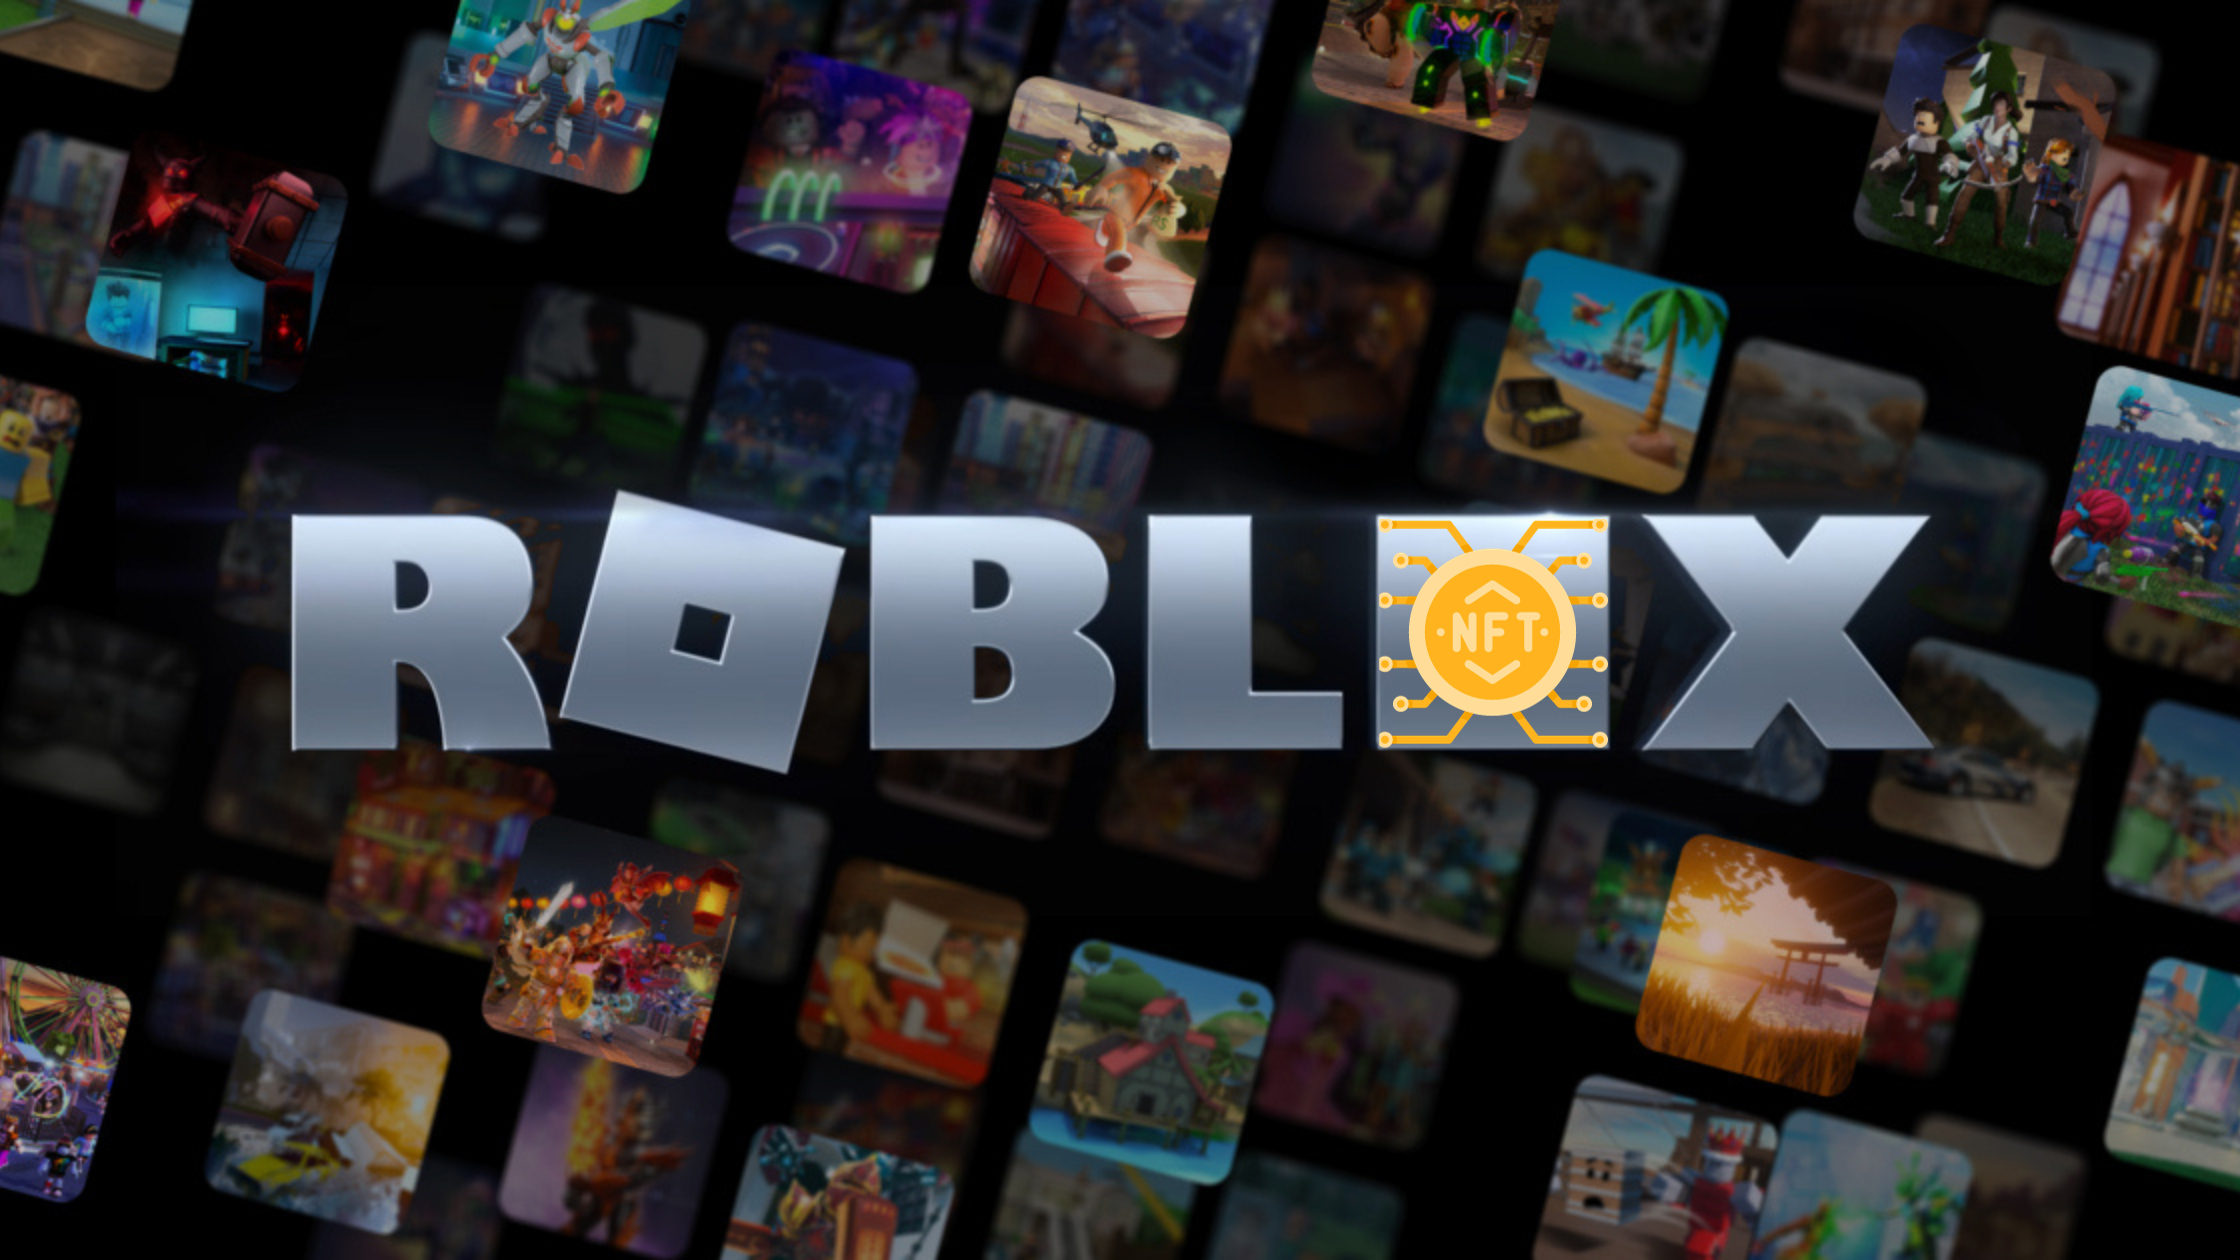 Individual brands will play a role in the metaverse, says Roblox CEO David  Baszucki